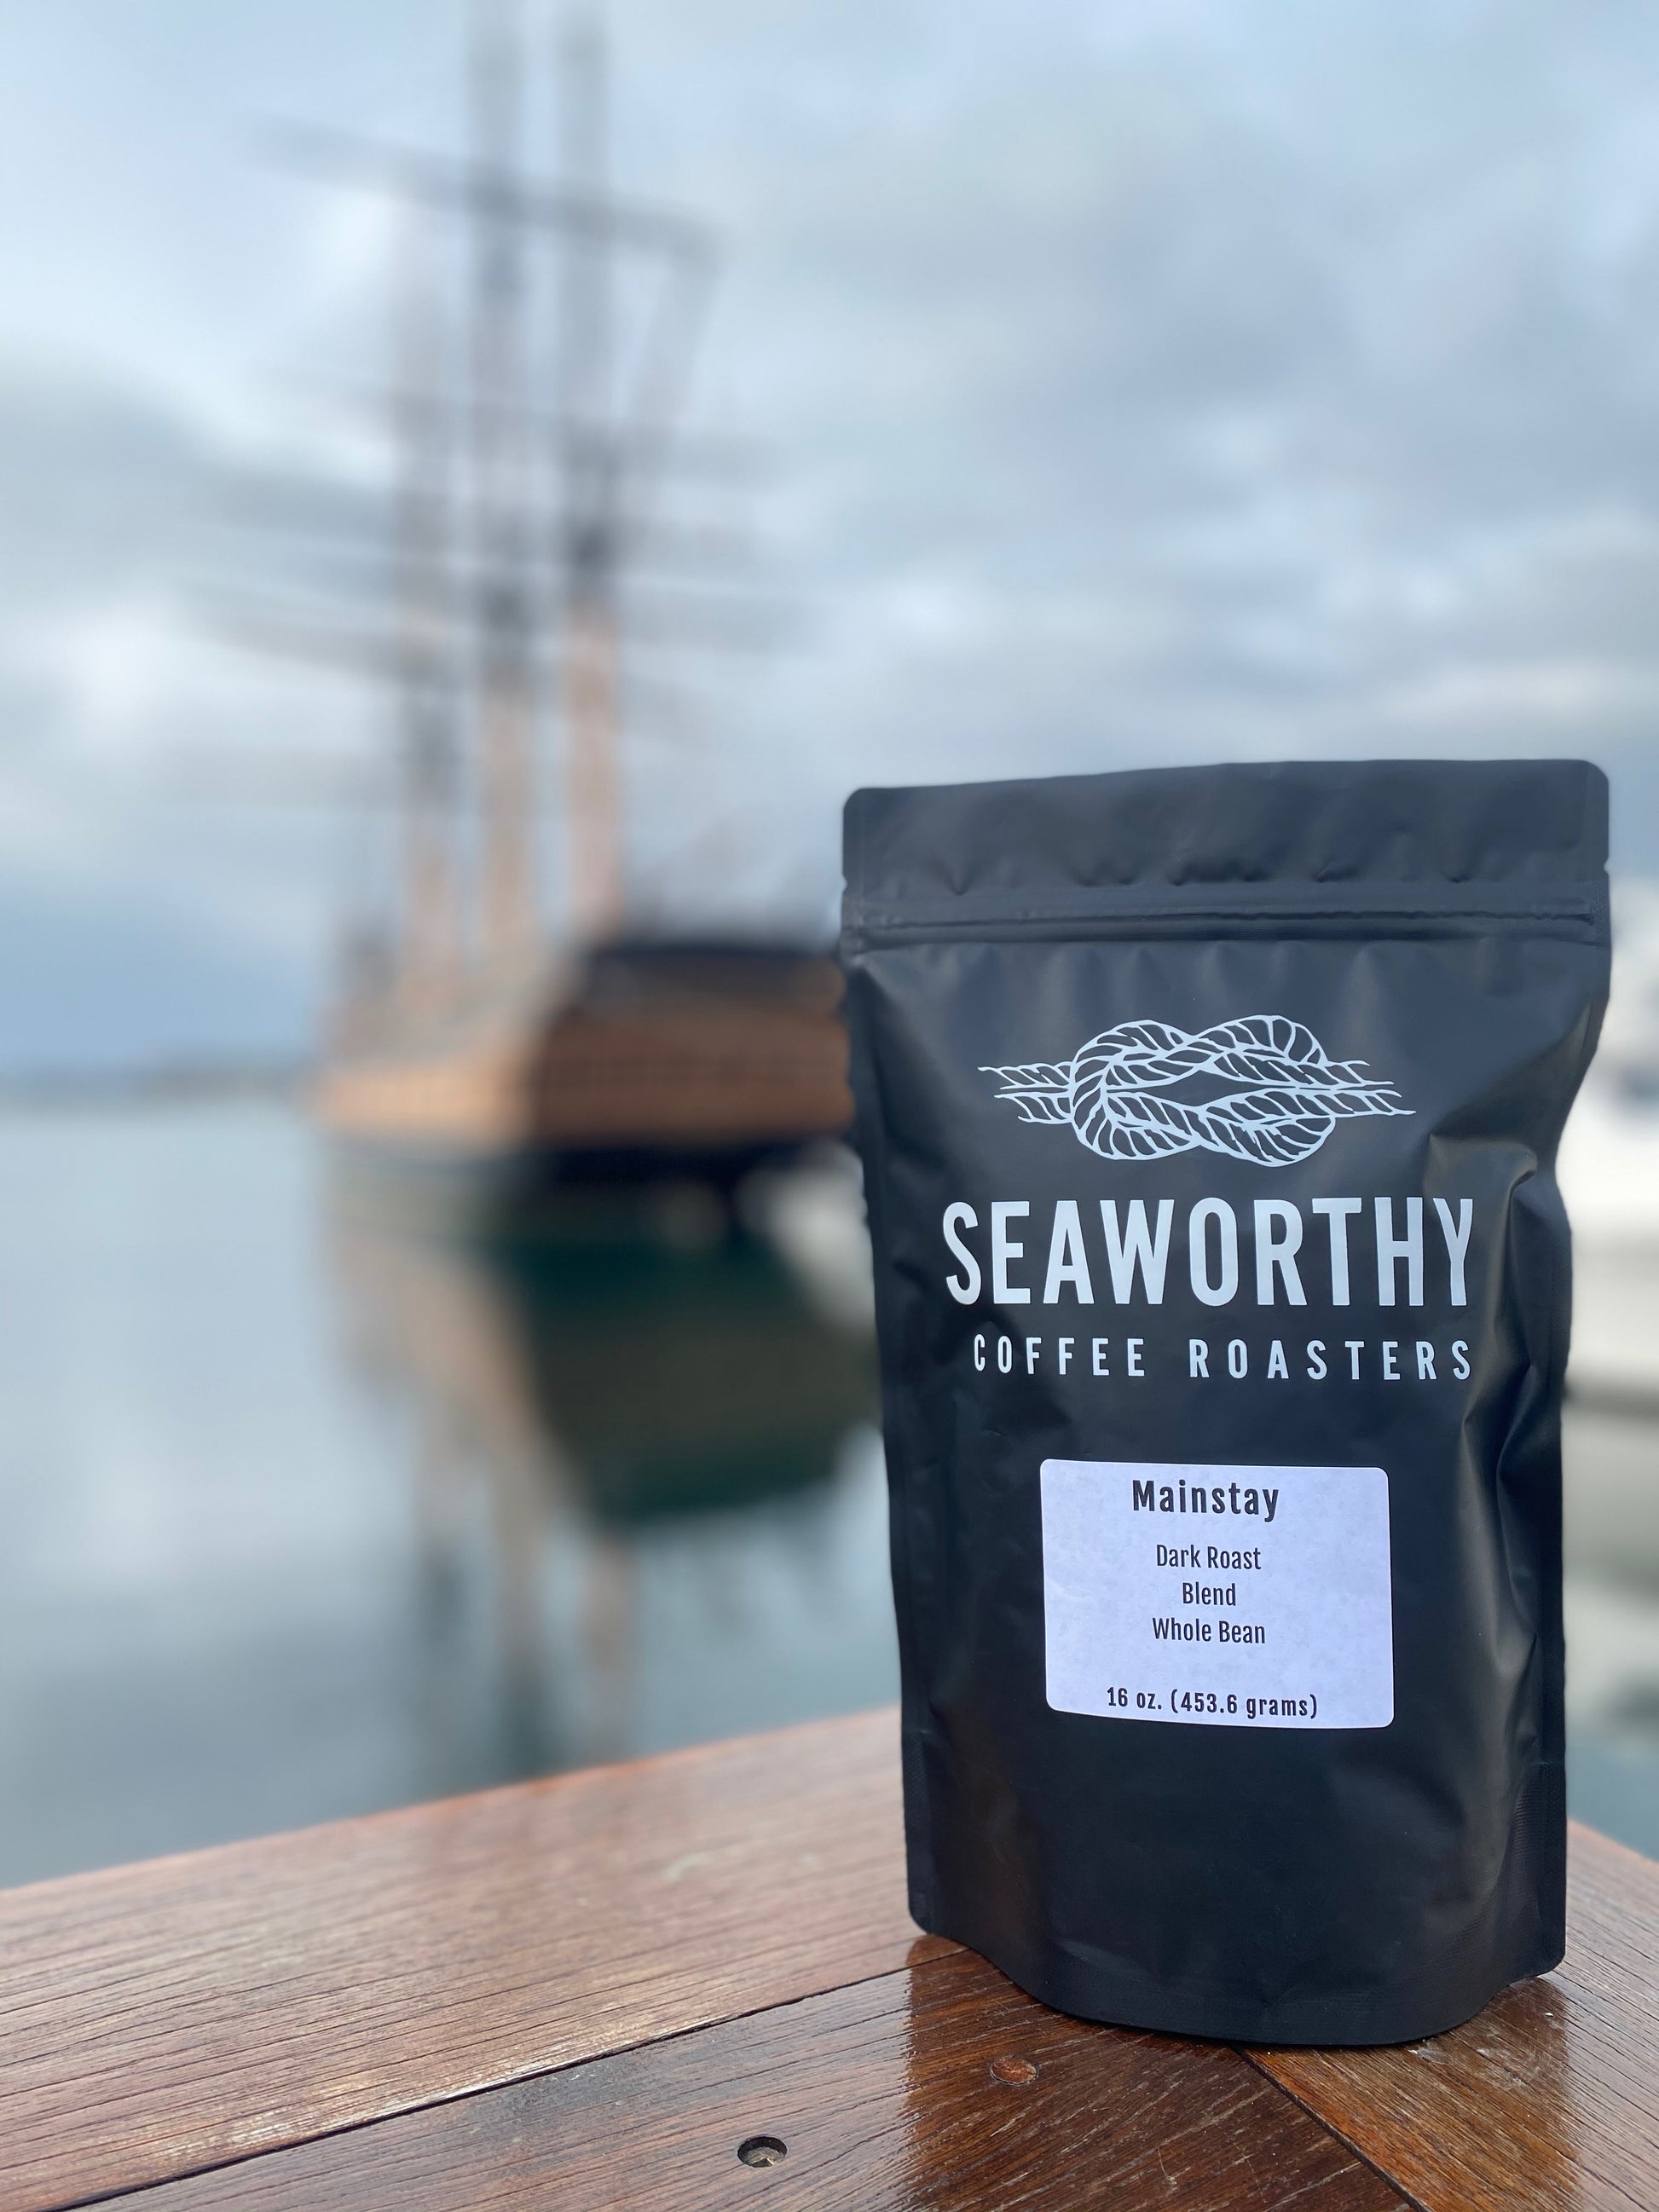 On a ship, the mainstay serves as part of the rigging that helps to stabilize the main mast. The mainstay acts as the chief support and makes it possible for the ship to get underway, much like this flavorful roast will do for you.   This rich blend boasts balanced sweet and bold flavor notes, with a medium body and low acidity.